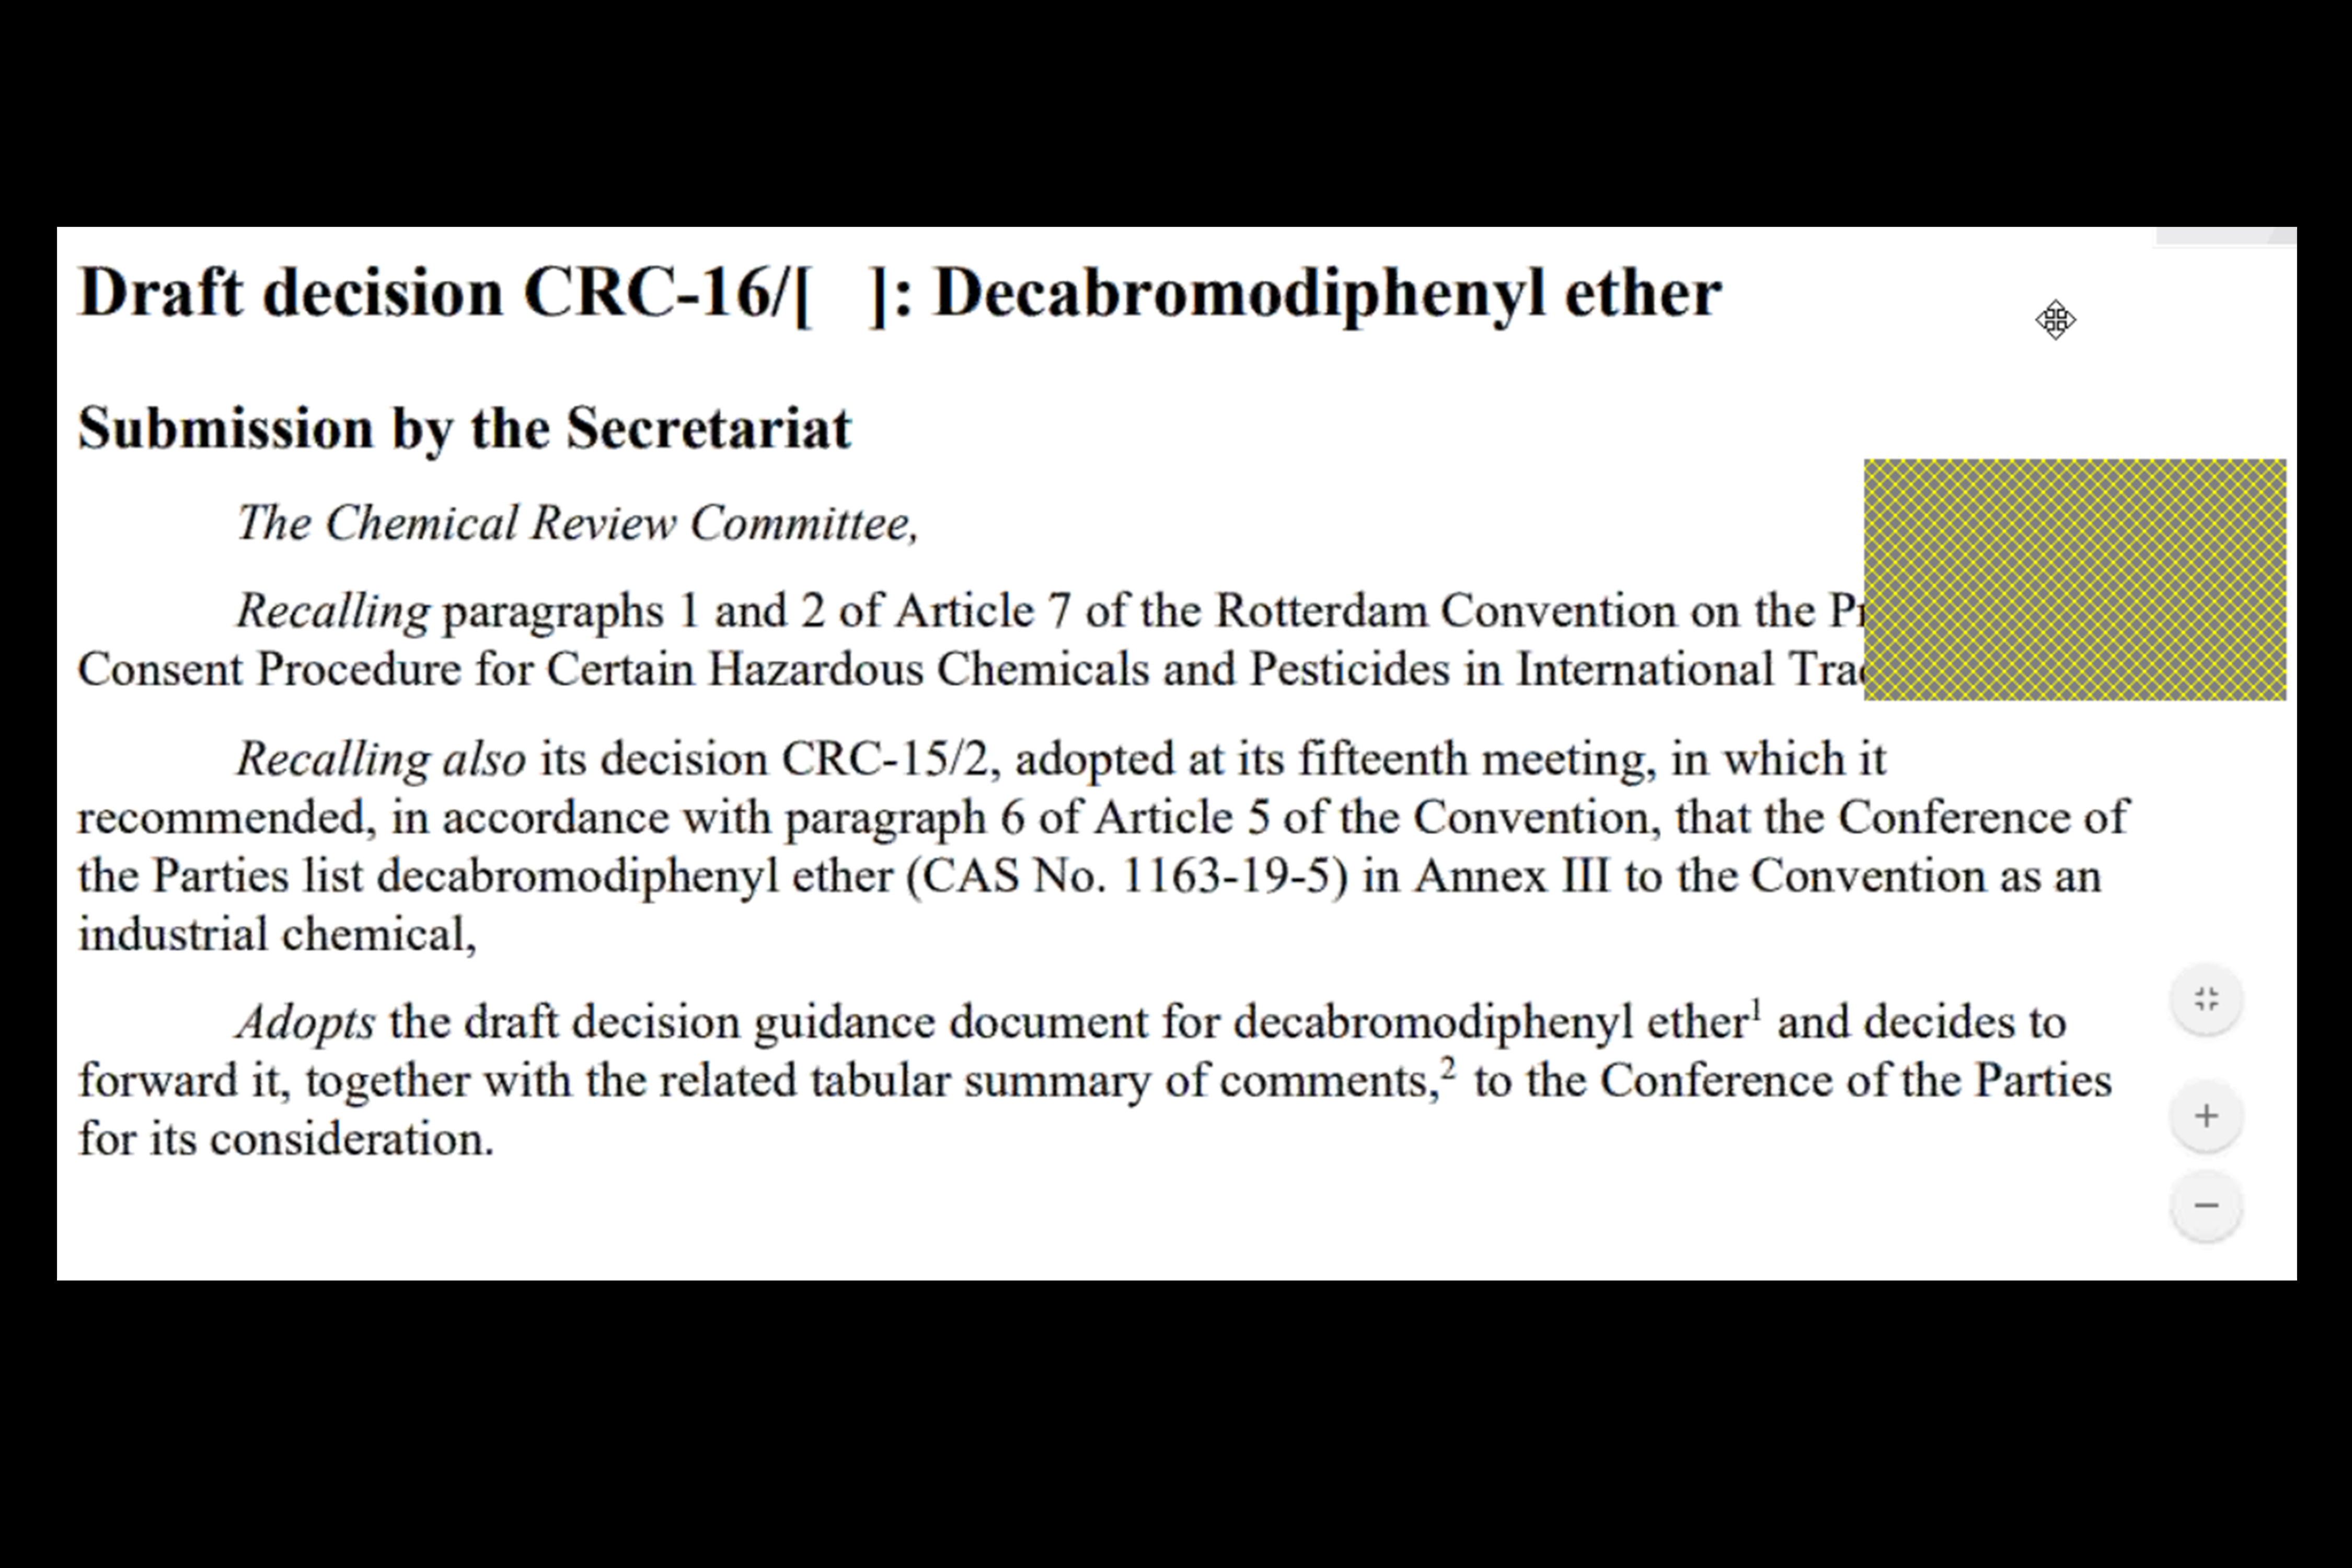 The Committee adopted the guidance on decabromodiphenyl ether (decaBDE).